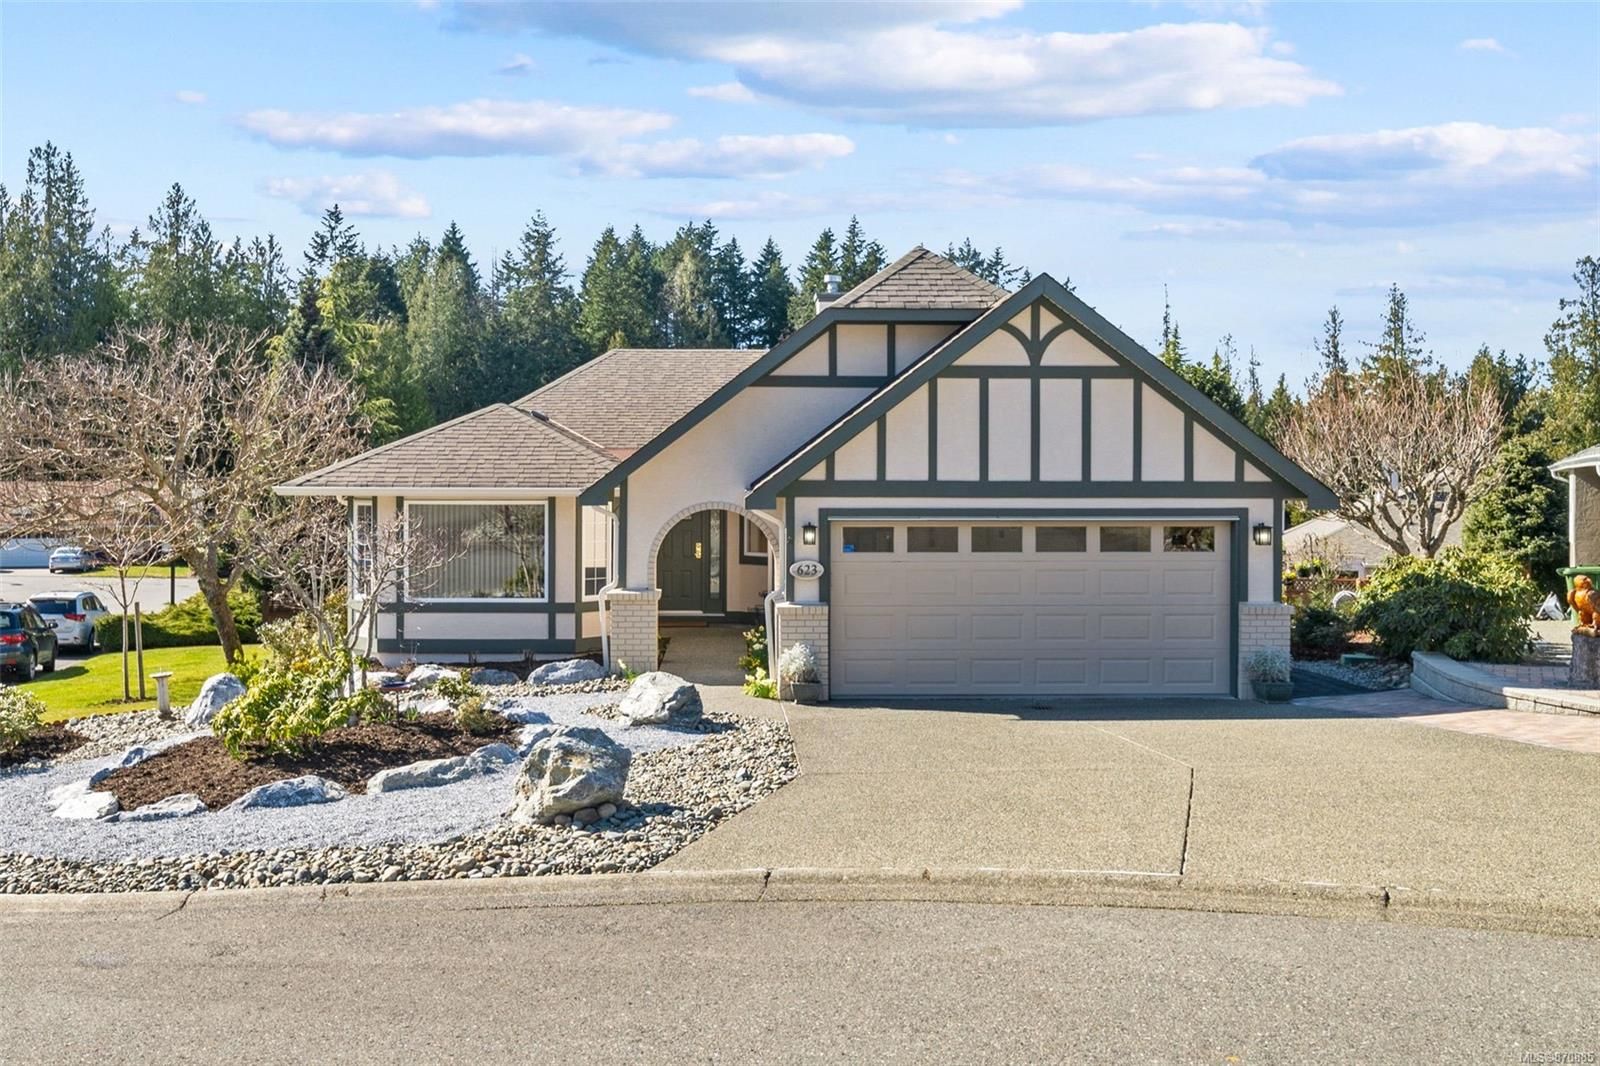 Immaculate rancher style home on a sunny corner lot in beautiful Arbutus Ridge